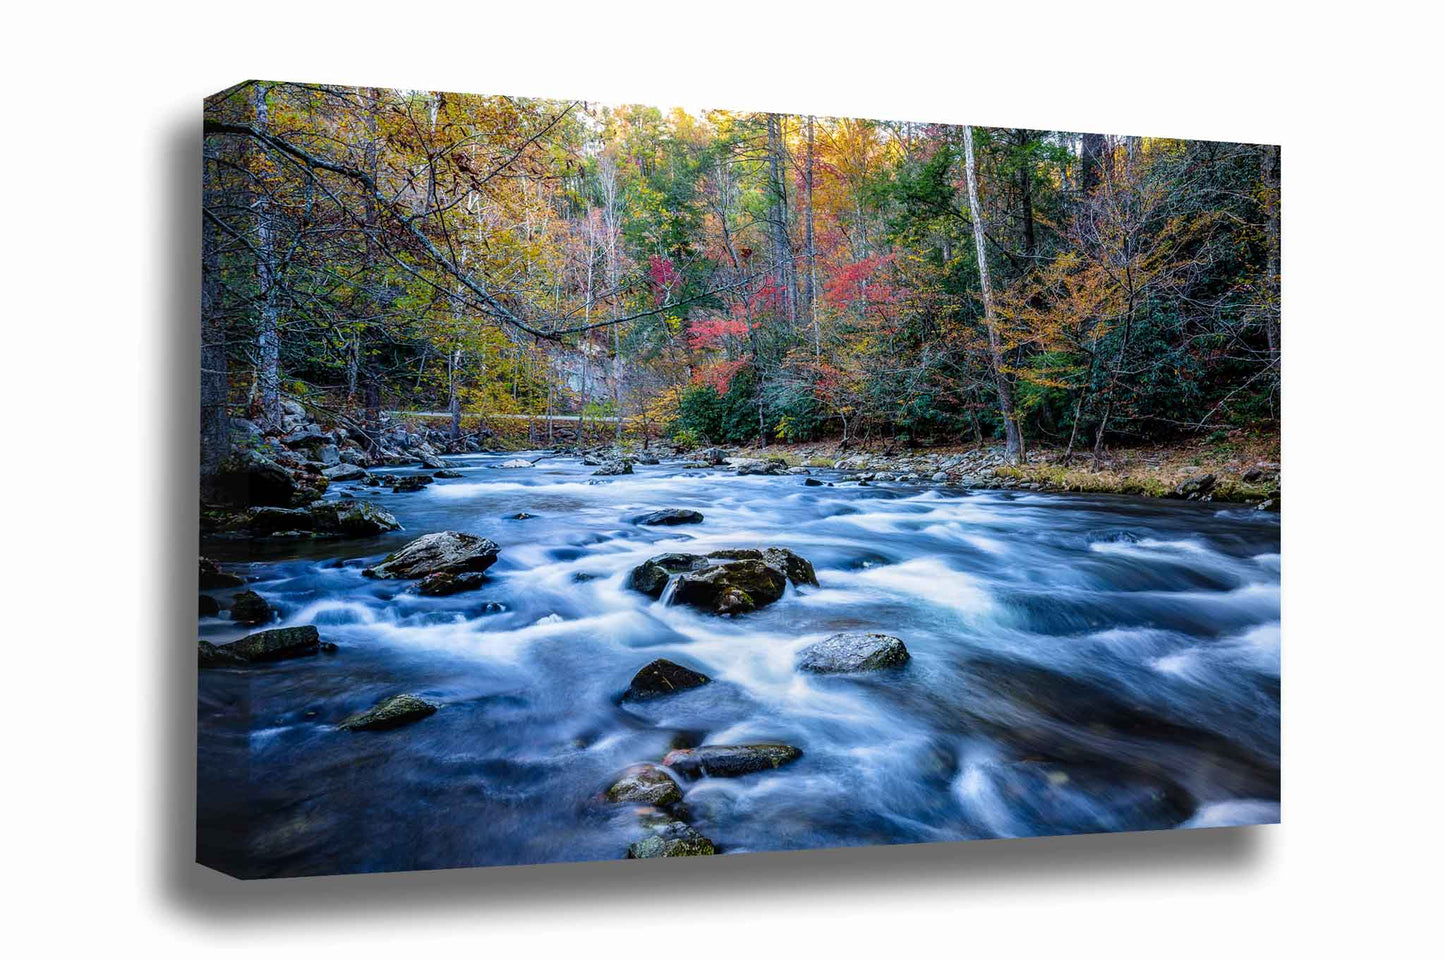 Landscape canvas wall art of Laurel Creek rushing through fall color on an autumn day in the Great Smoky Mountains of Tennessee by Sean Ramsey of Southern Plains Photography.